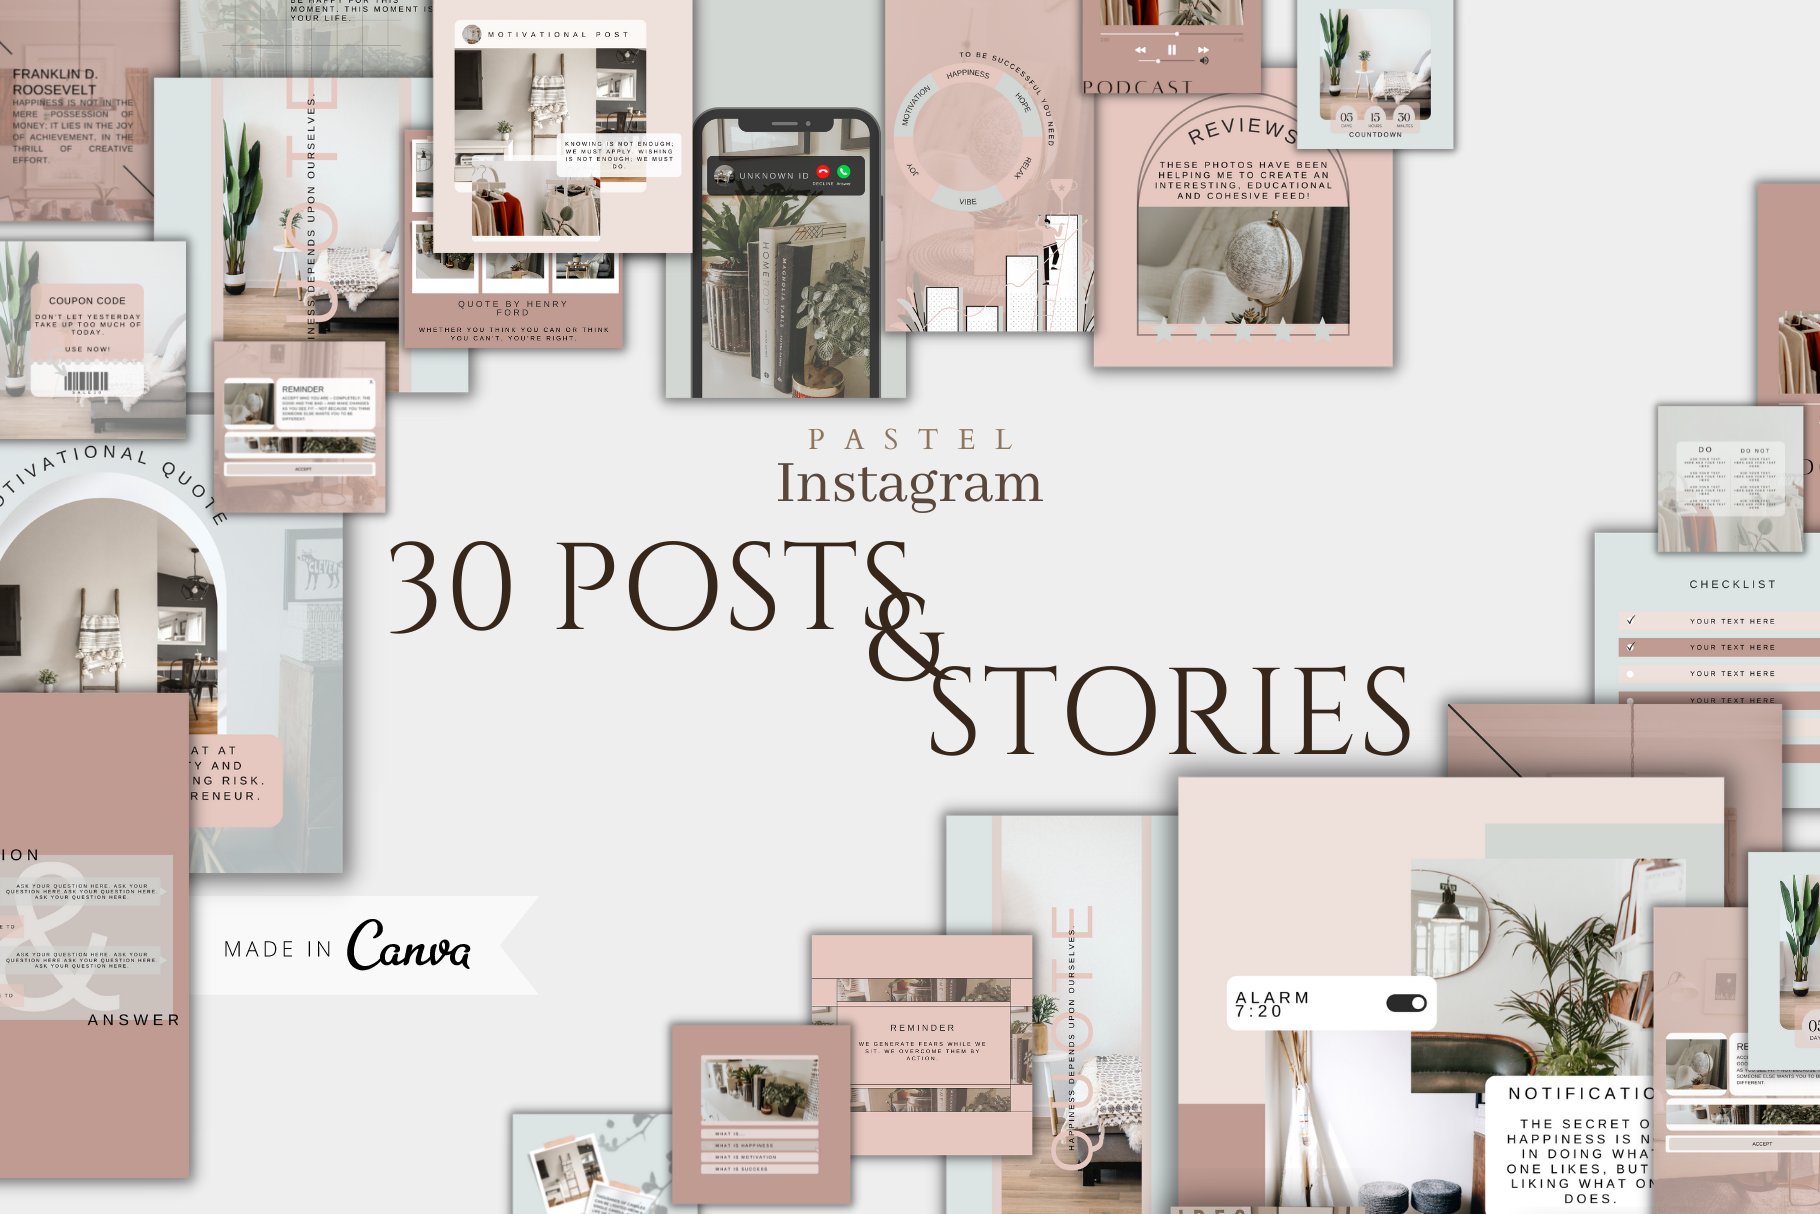 Bundle includes 30posts and stories.